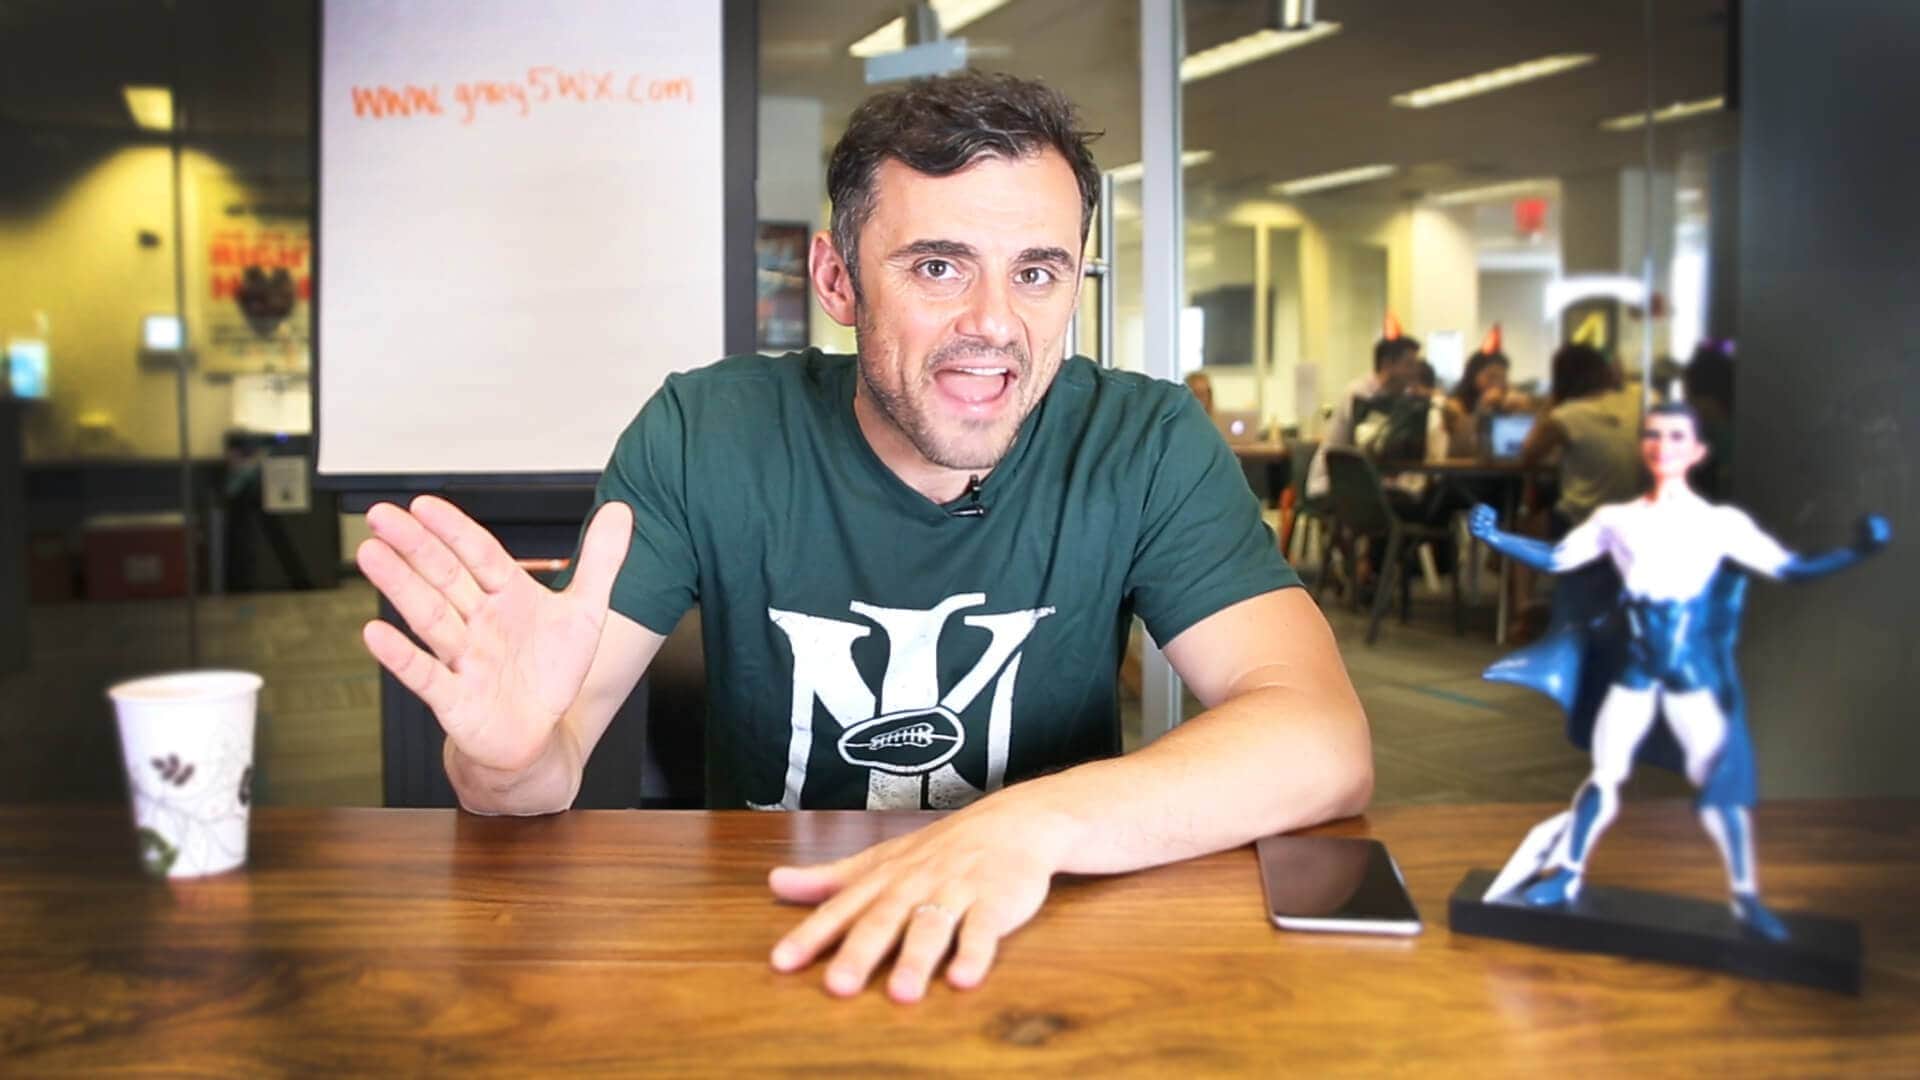 Gary Vaynerchuk announces the winners of his contest